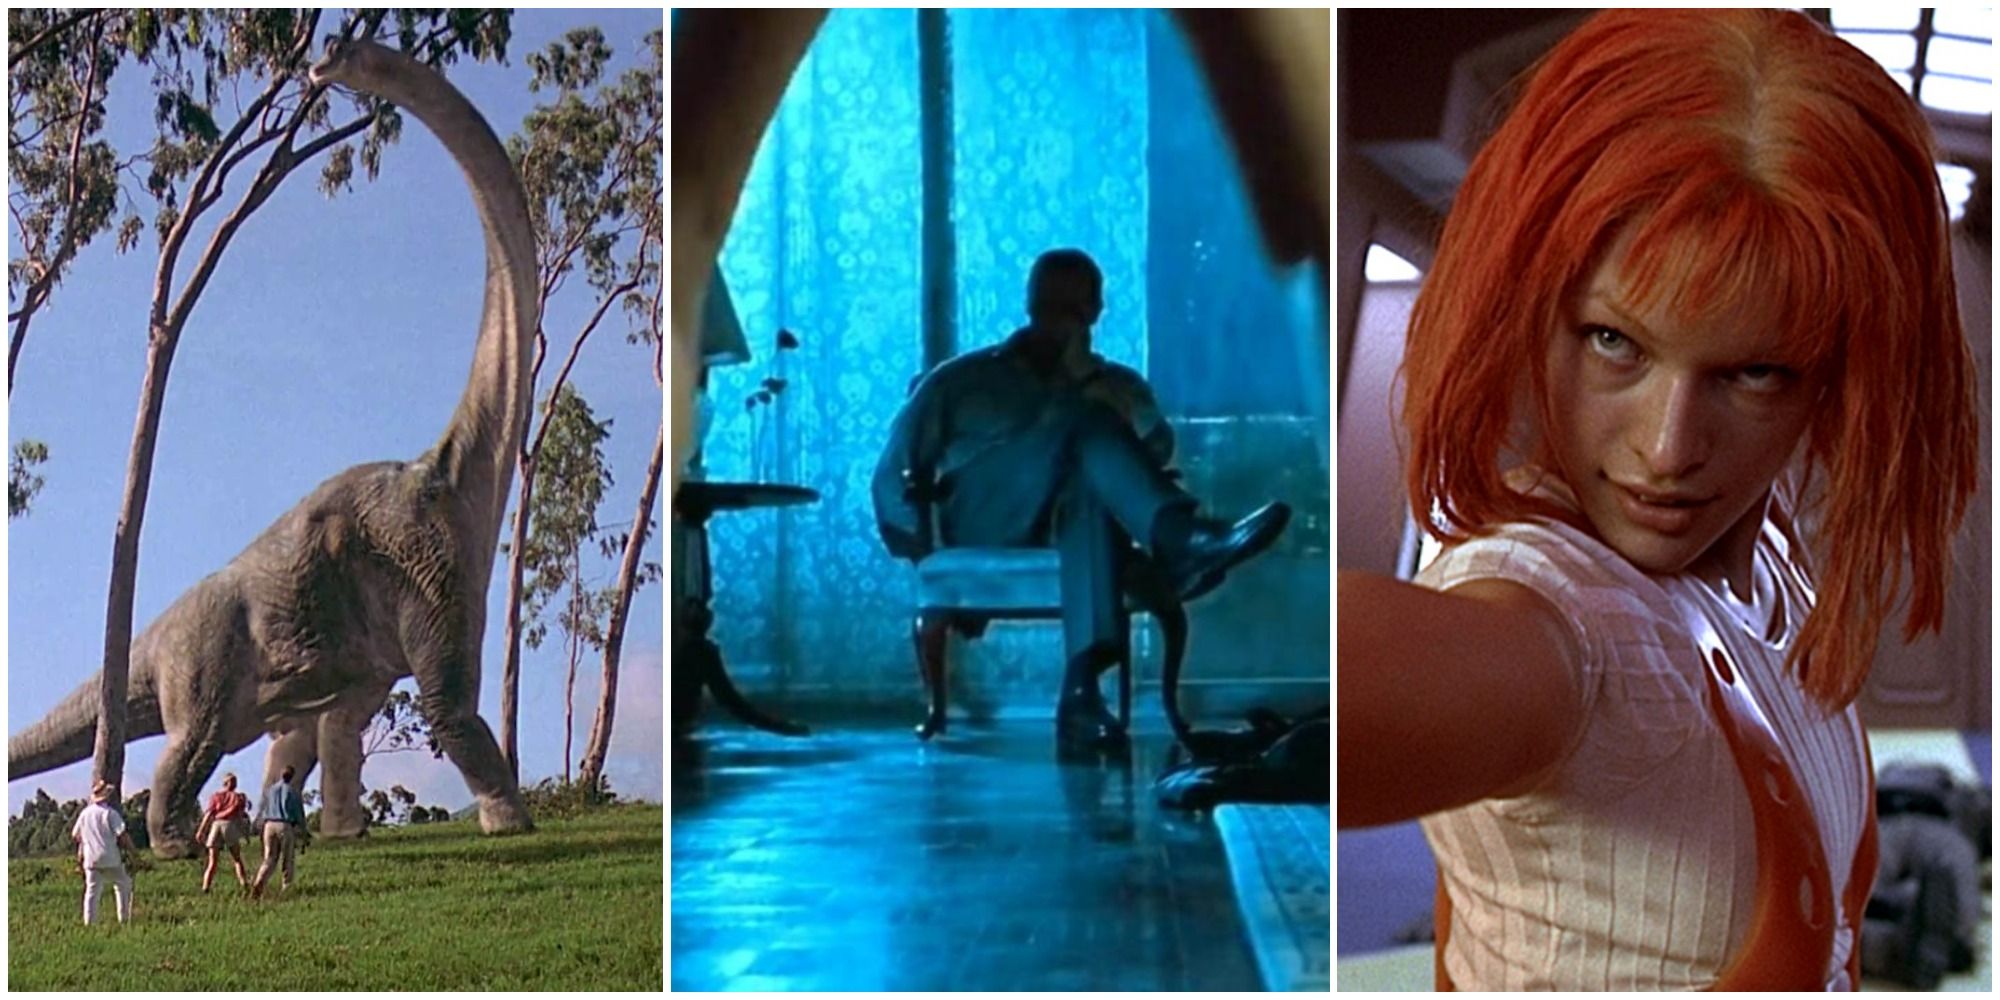 Jurassic Park, True Lies, and The Fifth Element